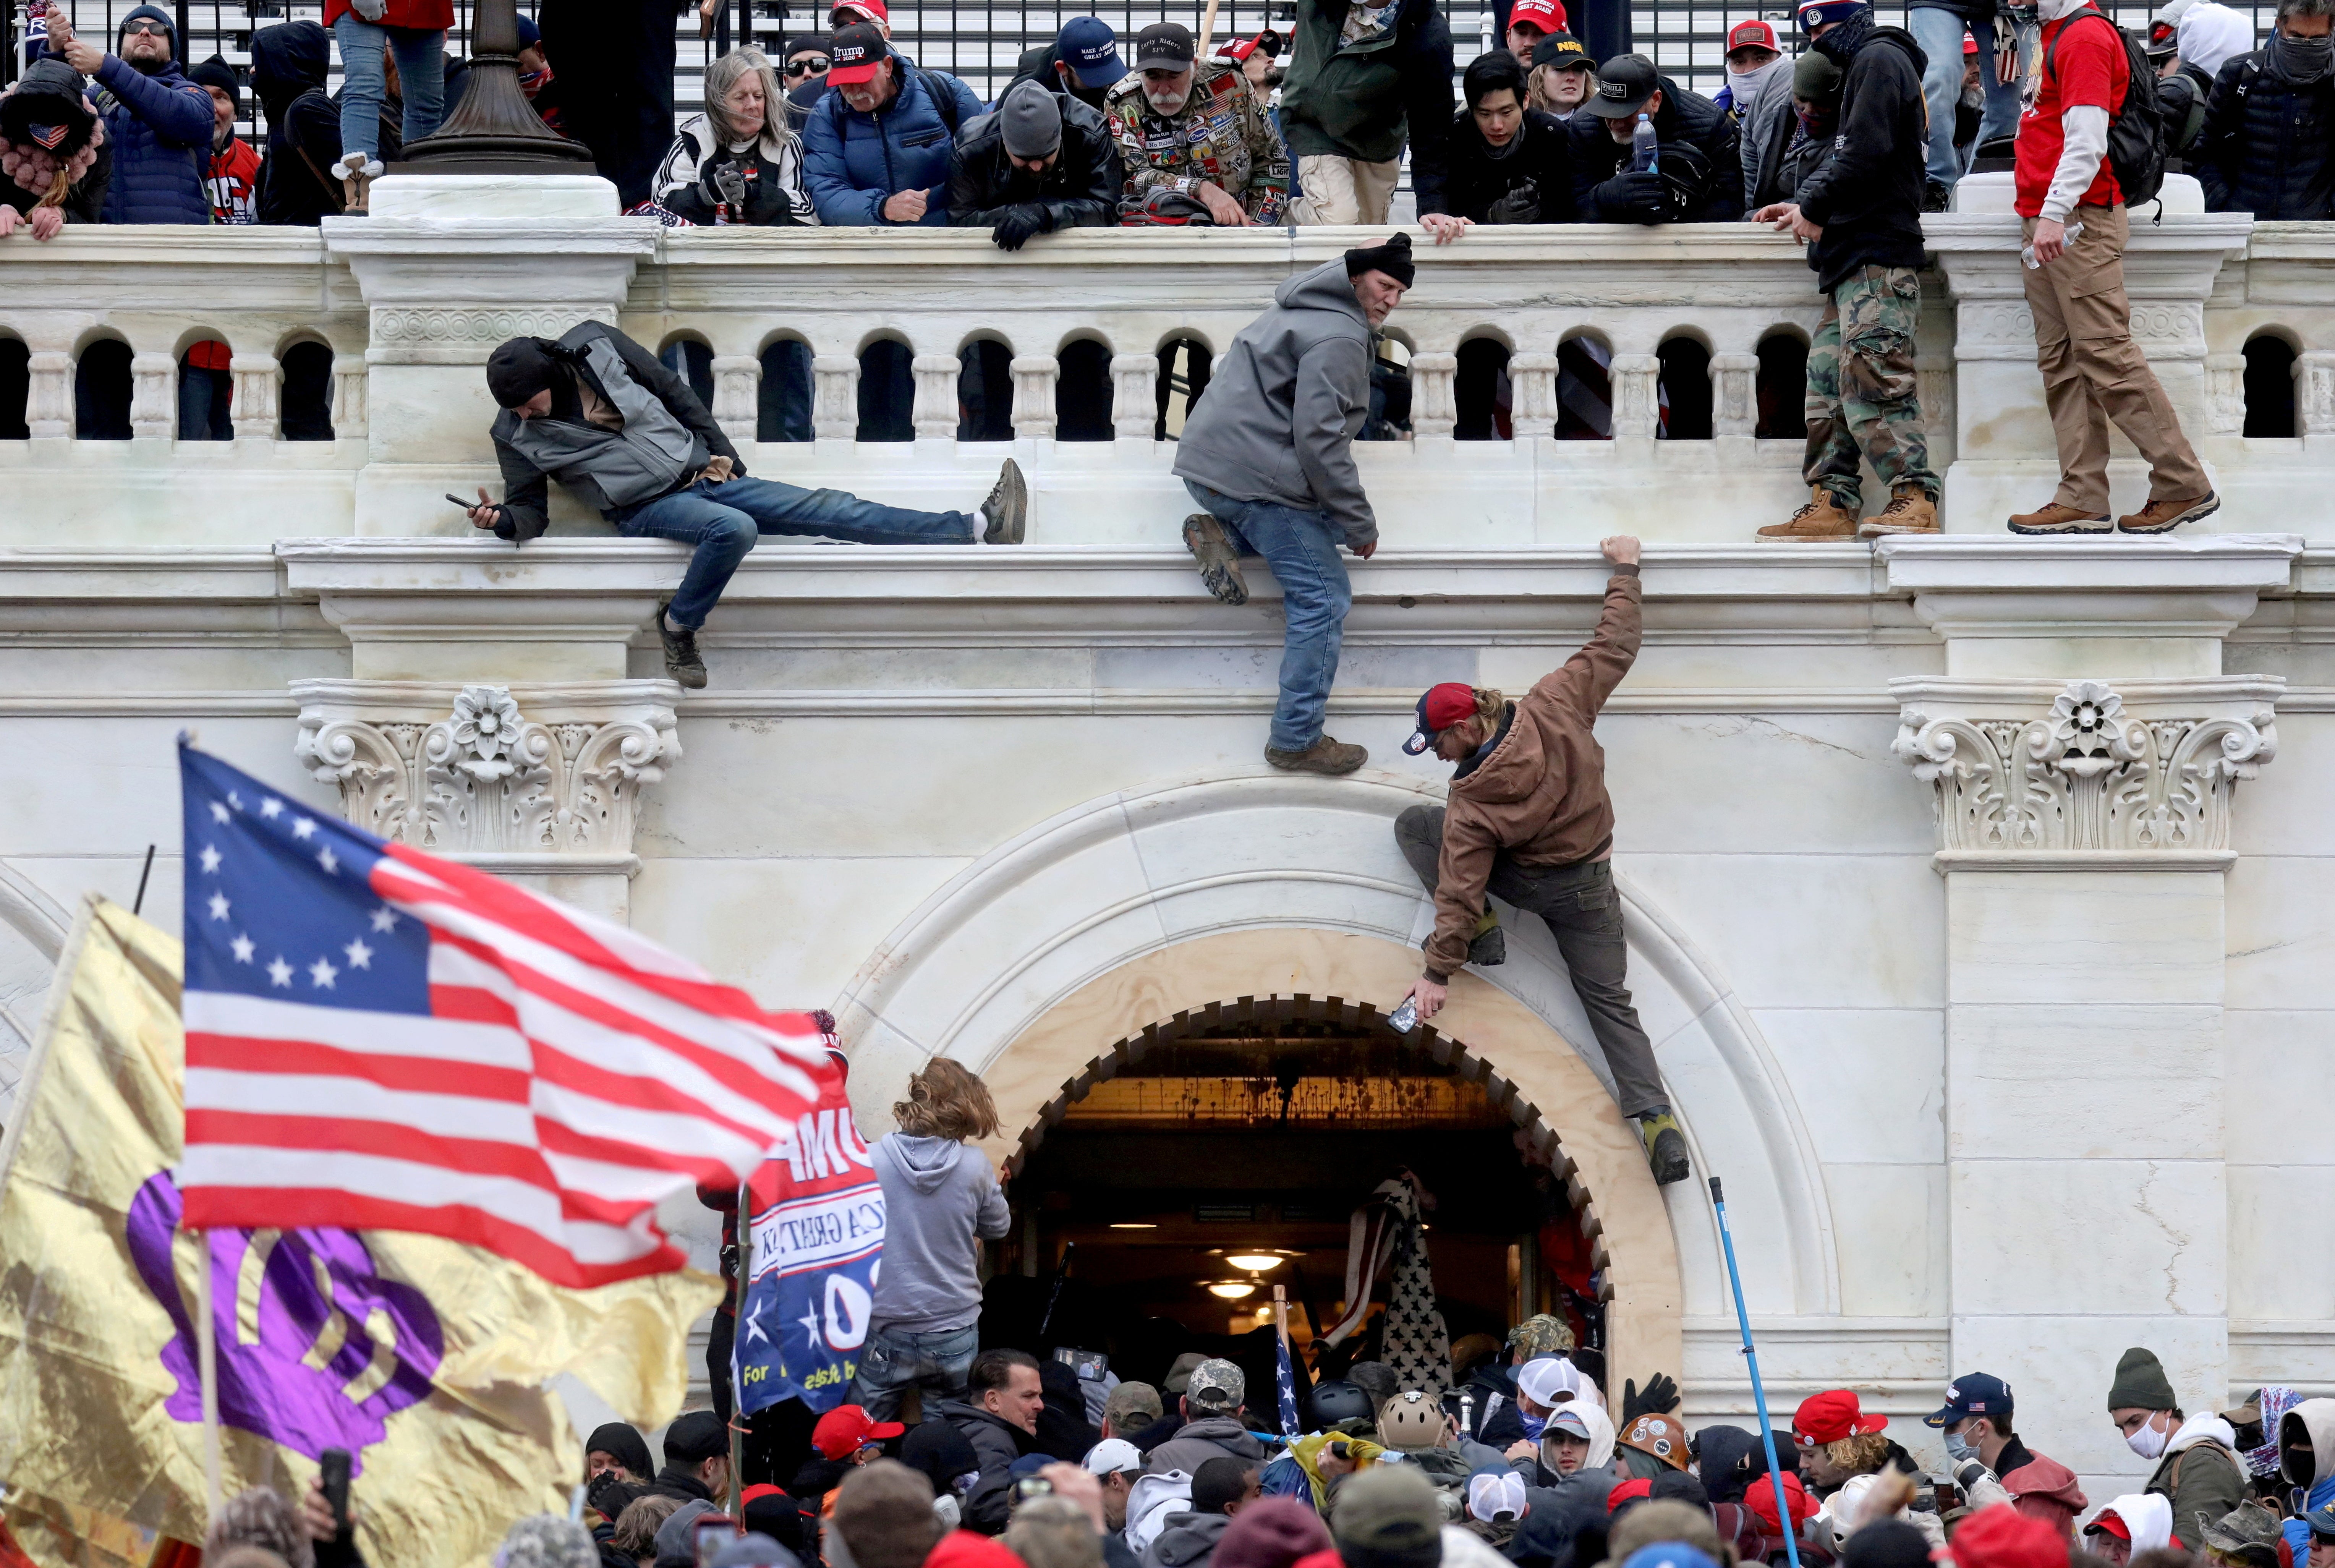 A mob of supporters of U.S. President Donald Trump fight with members of law enforcement at a door they broke open as they storm the U.S. Capitol Building on January 6, 2021.